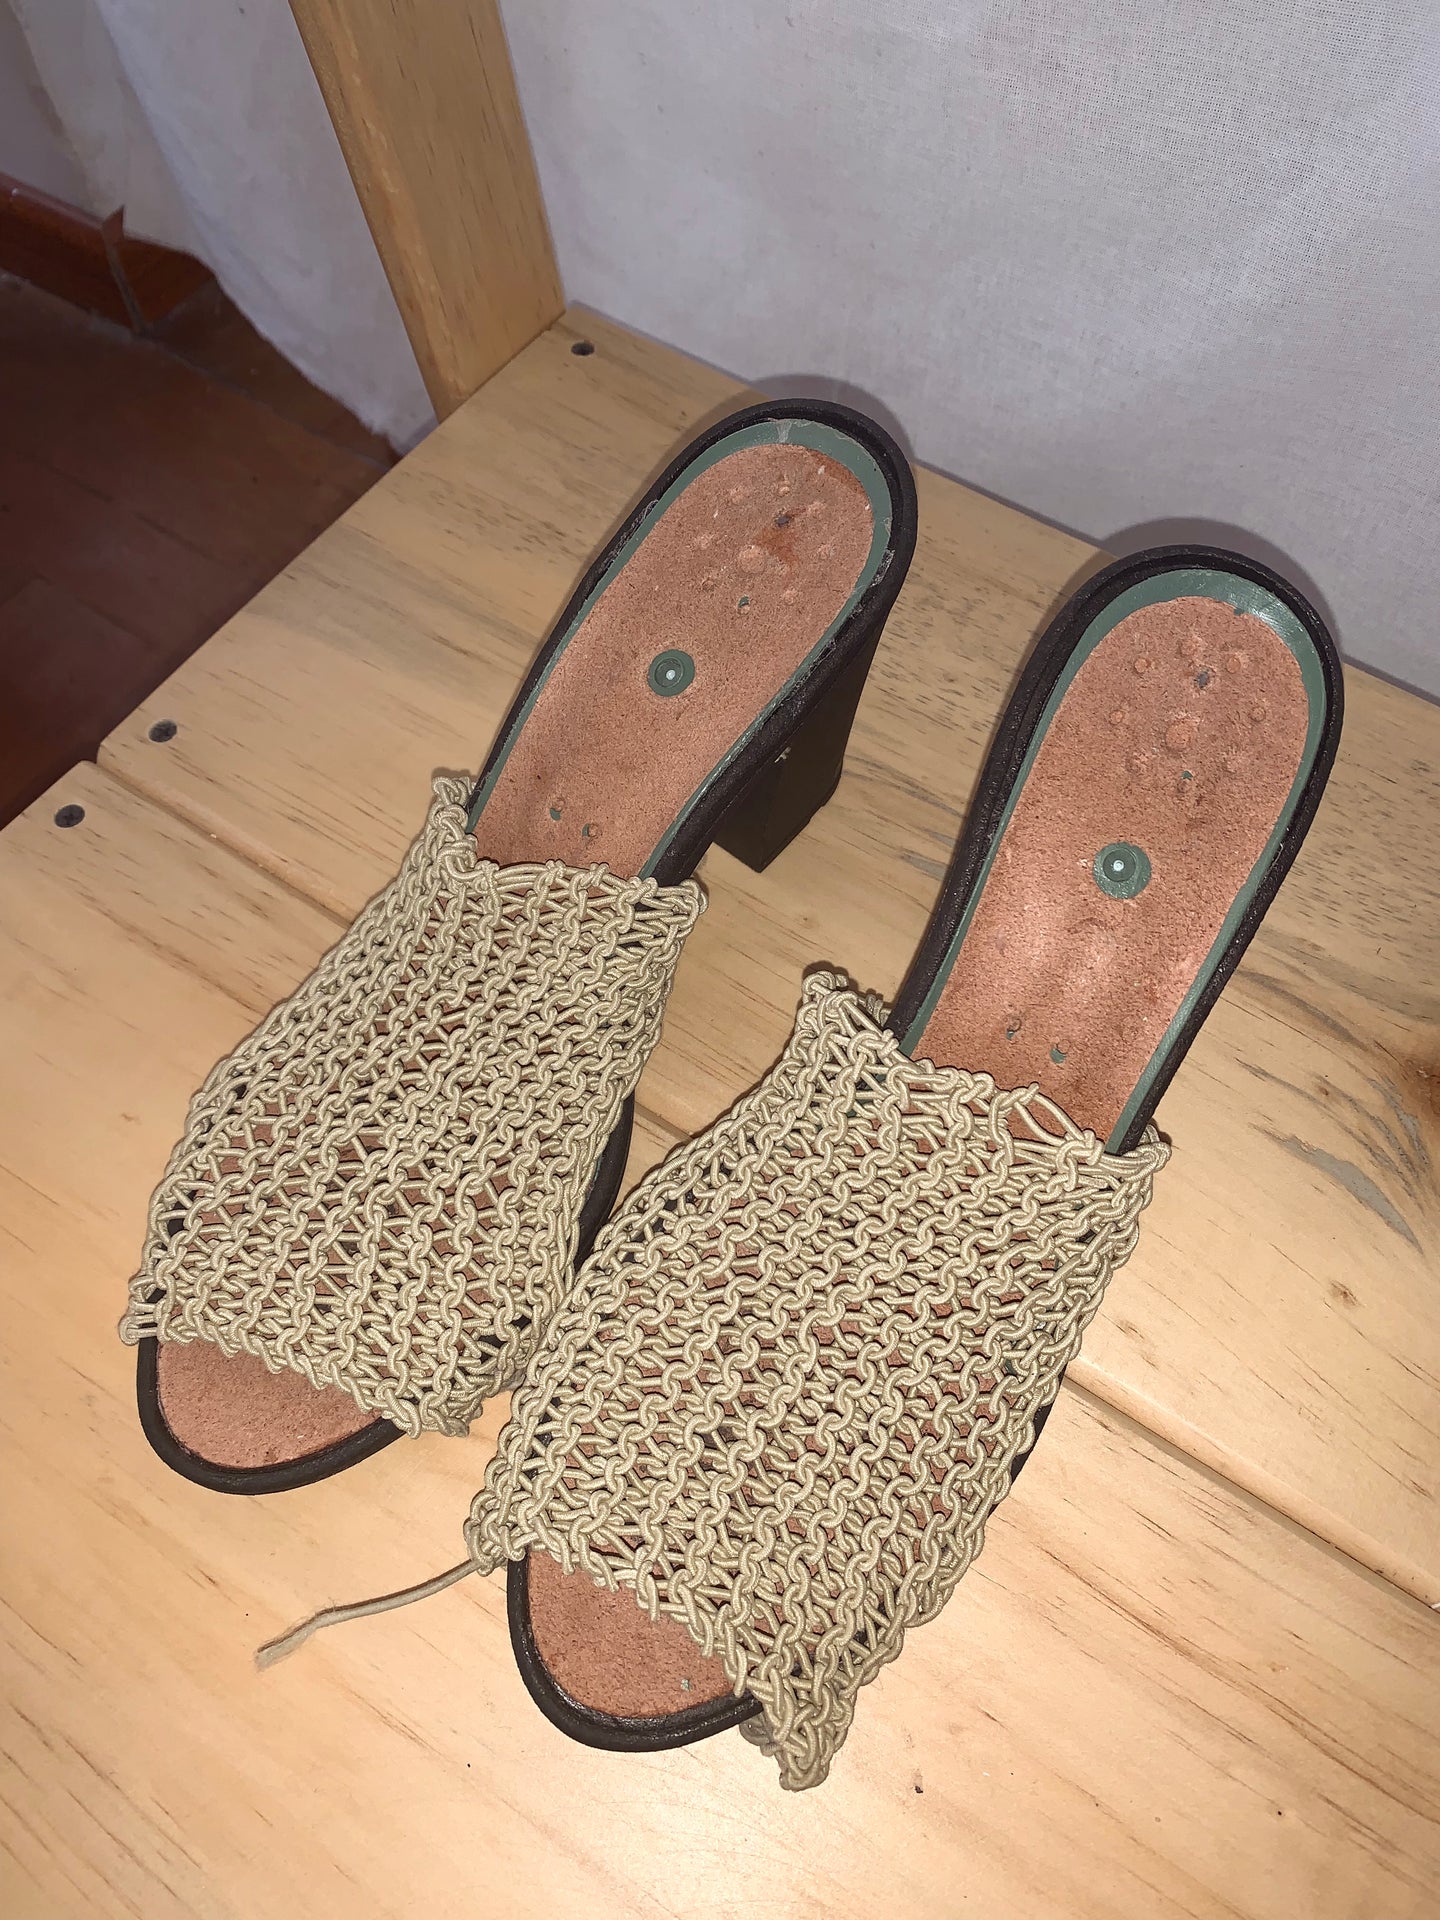 modular knitted foot coverings